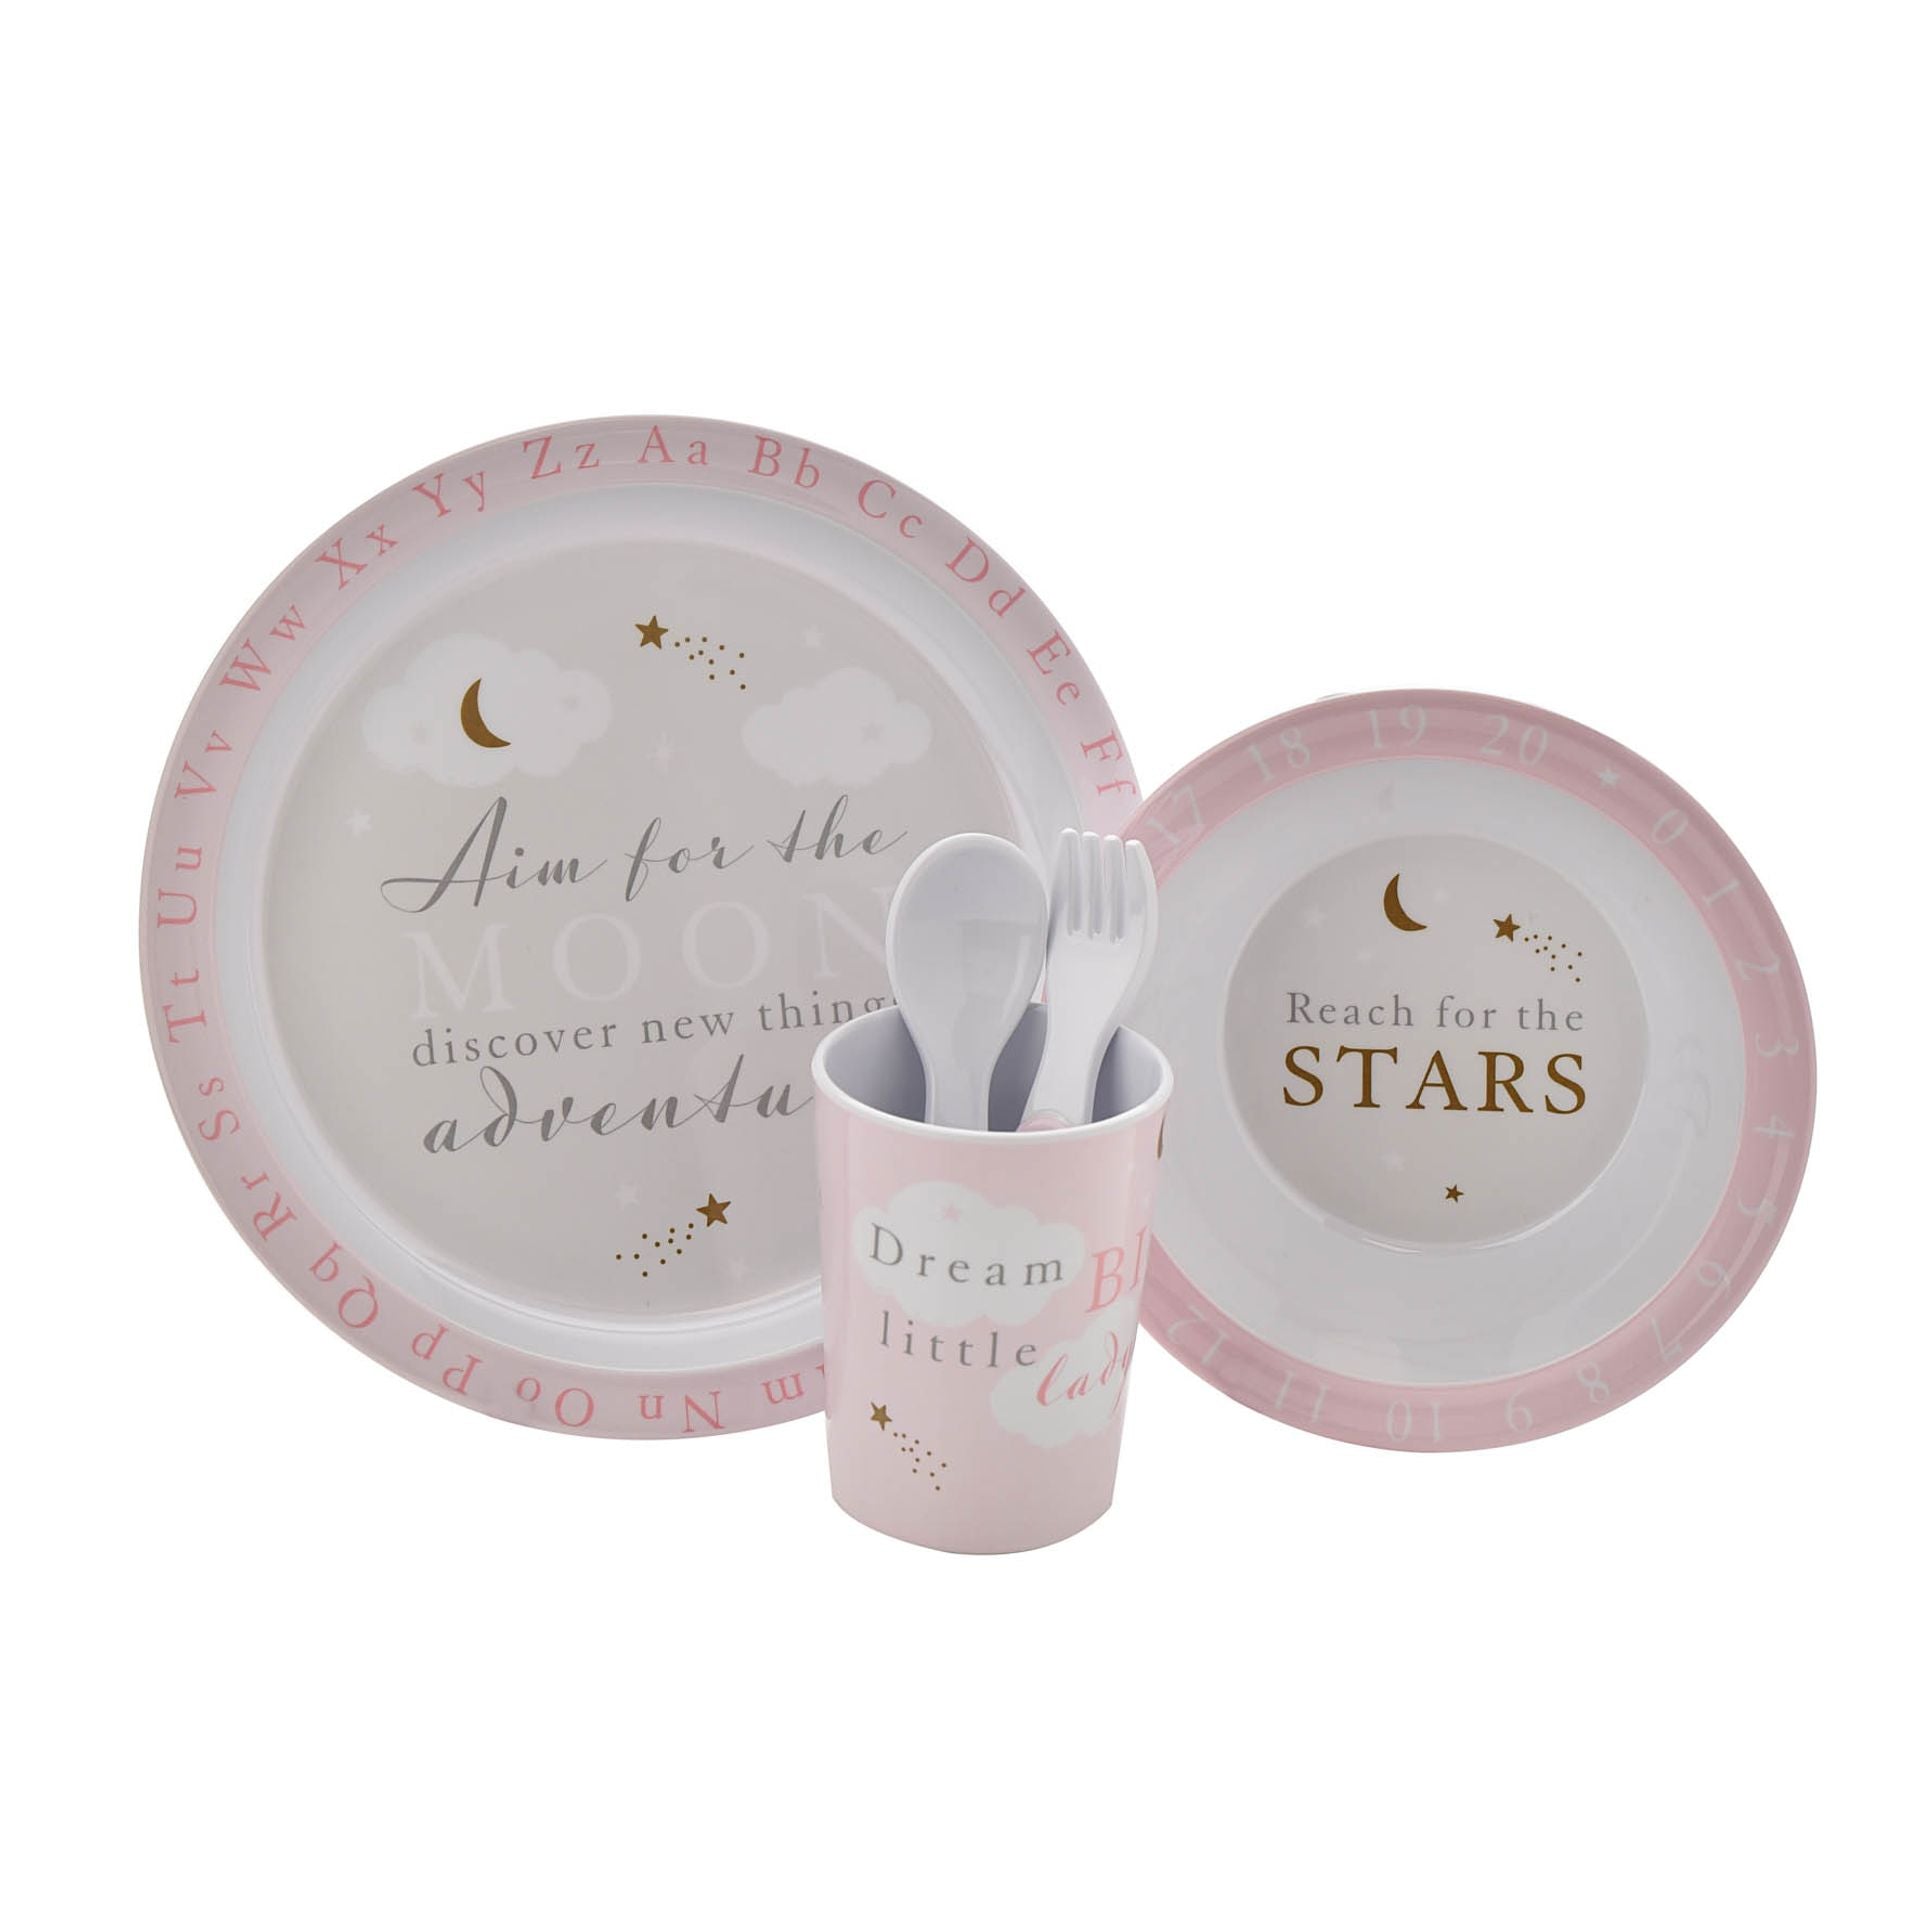 Five piece melamine plate stet with aim for the moon and reach for the stars in pink.  Plate, bowl, beaker, spoon and forlk